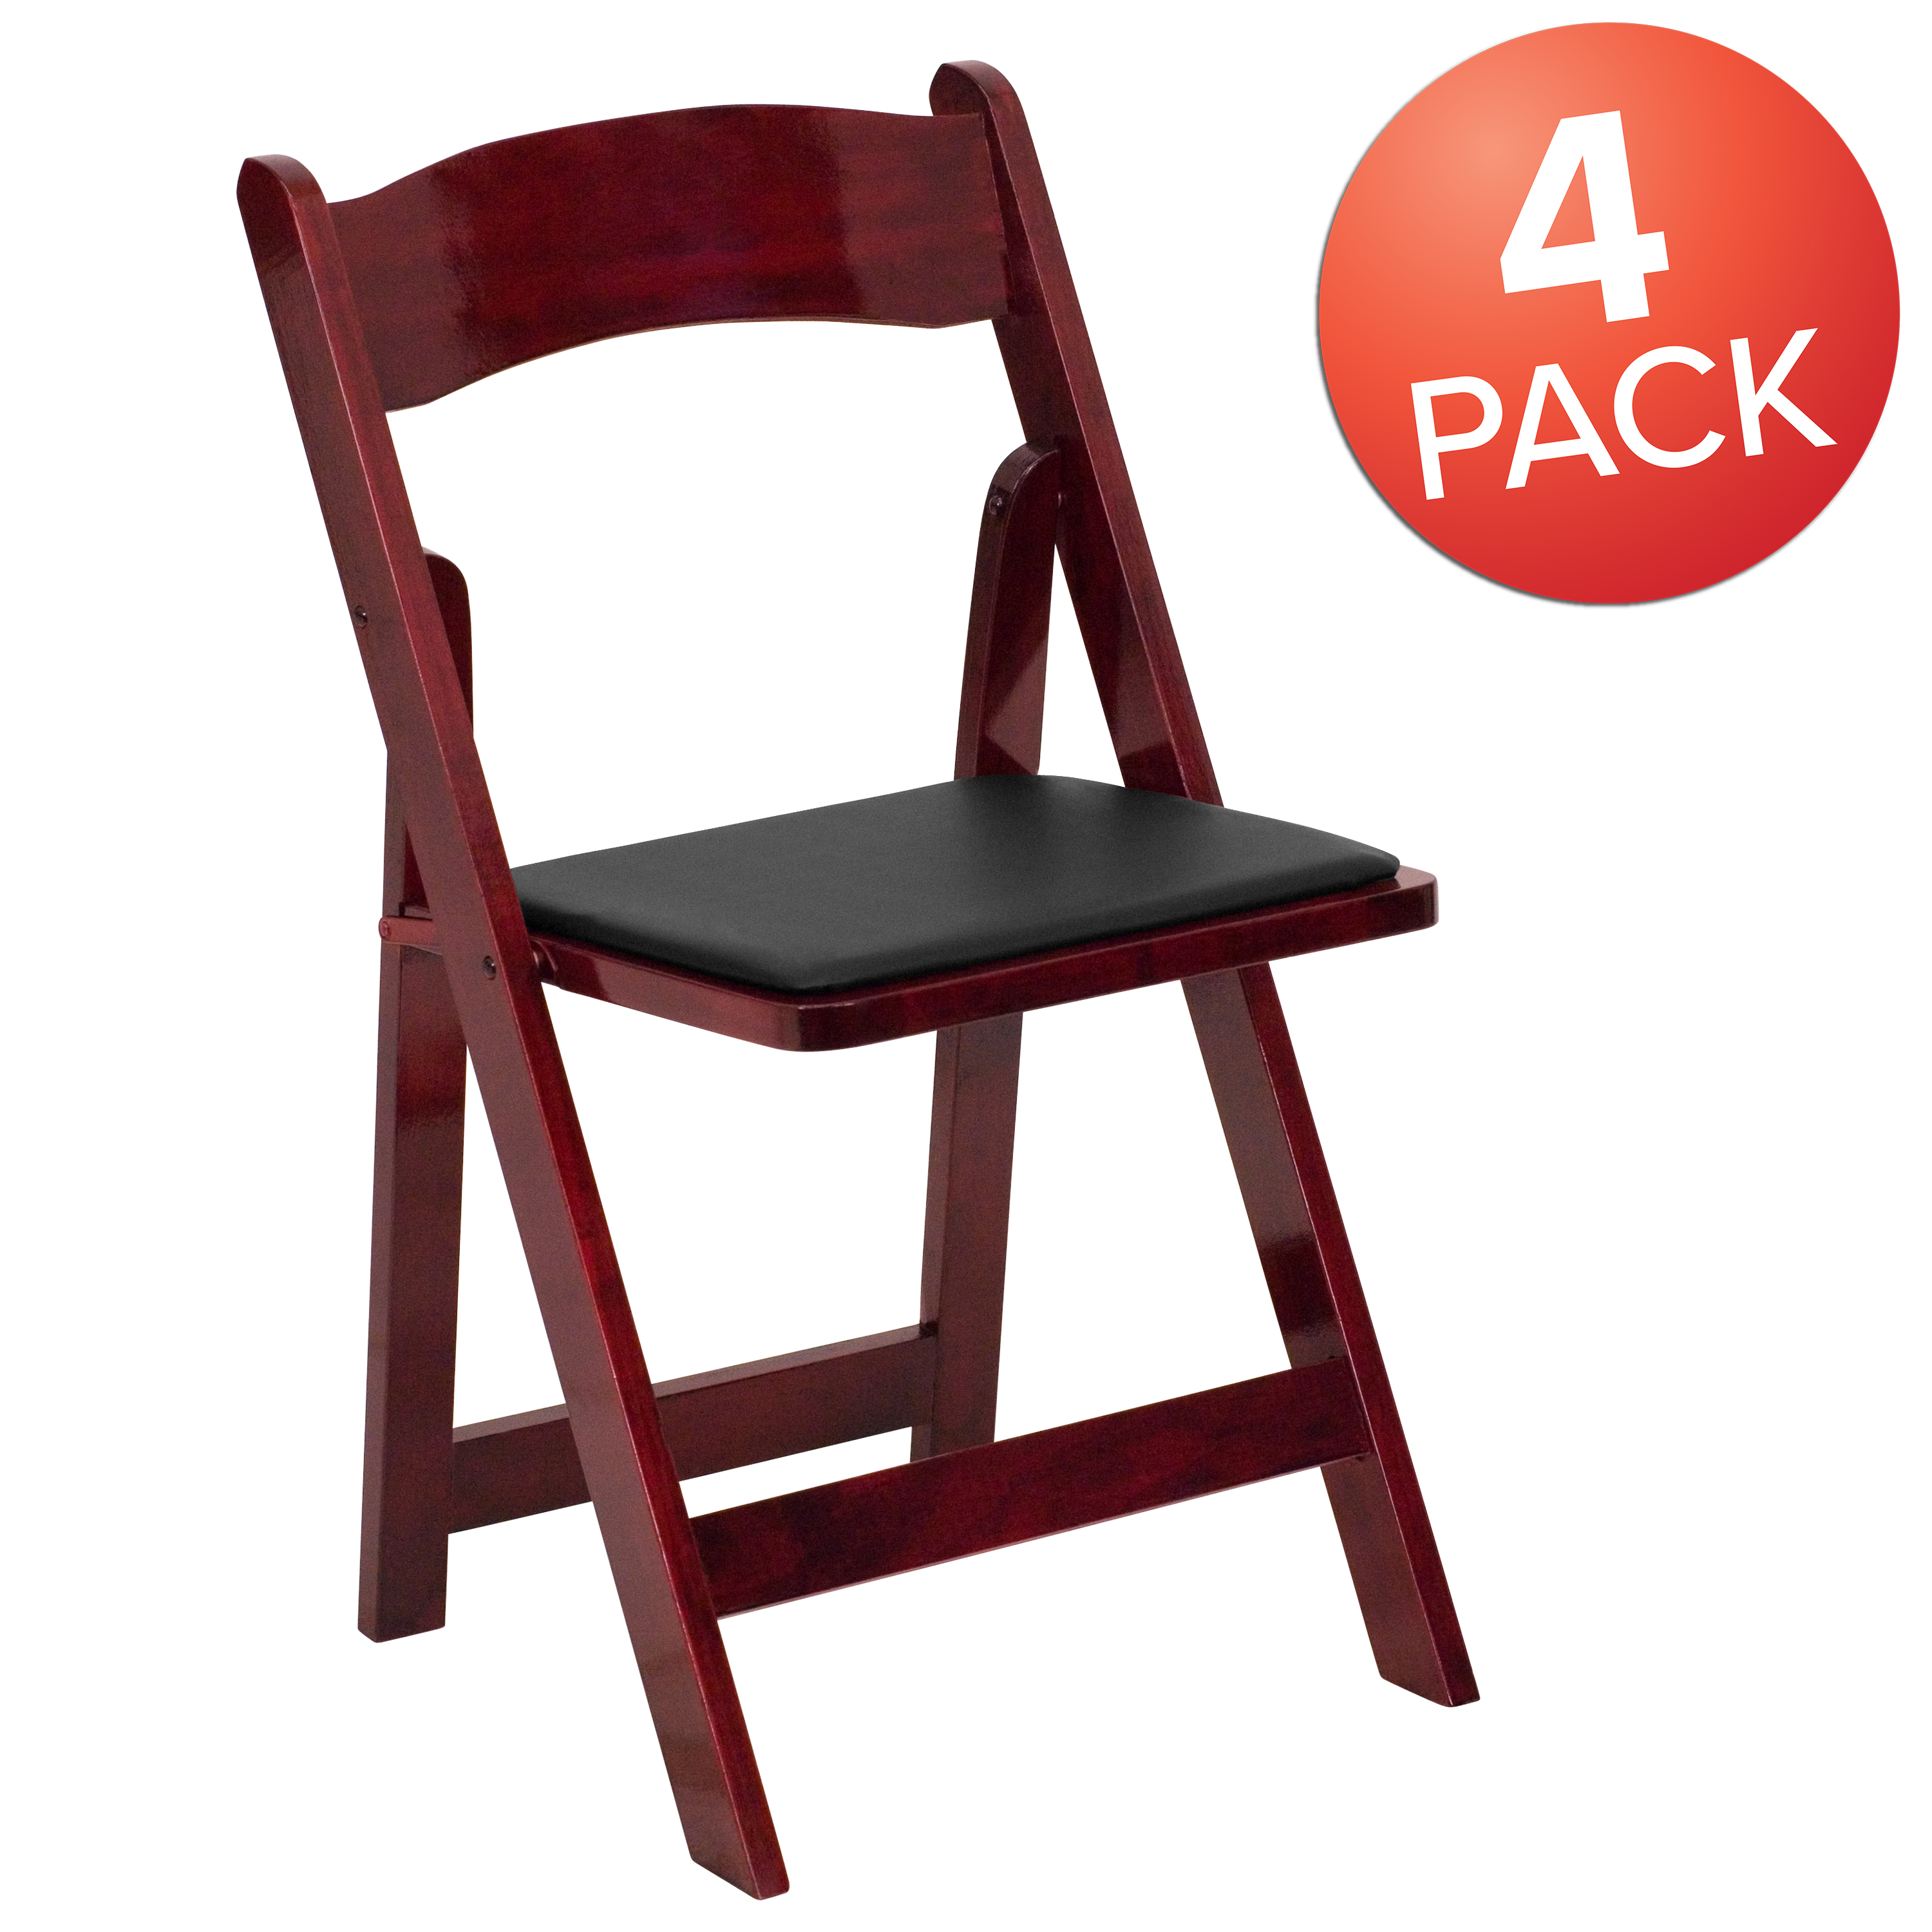 Flash Furniture 4 Pack HERCULES Series Mahogany Wood Folding Chair with Vinyl Padded Seat - image 3 of 9